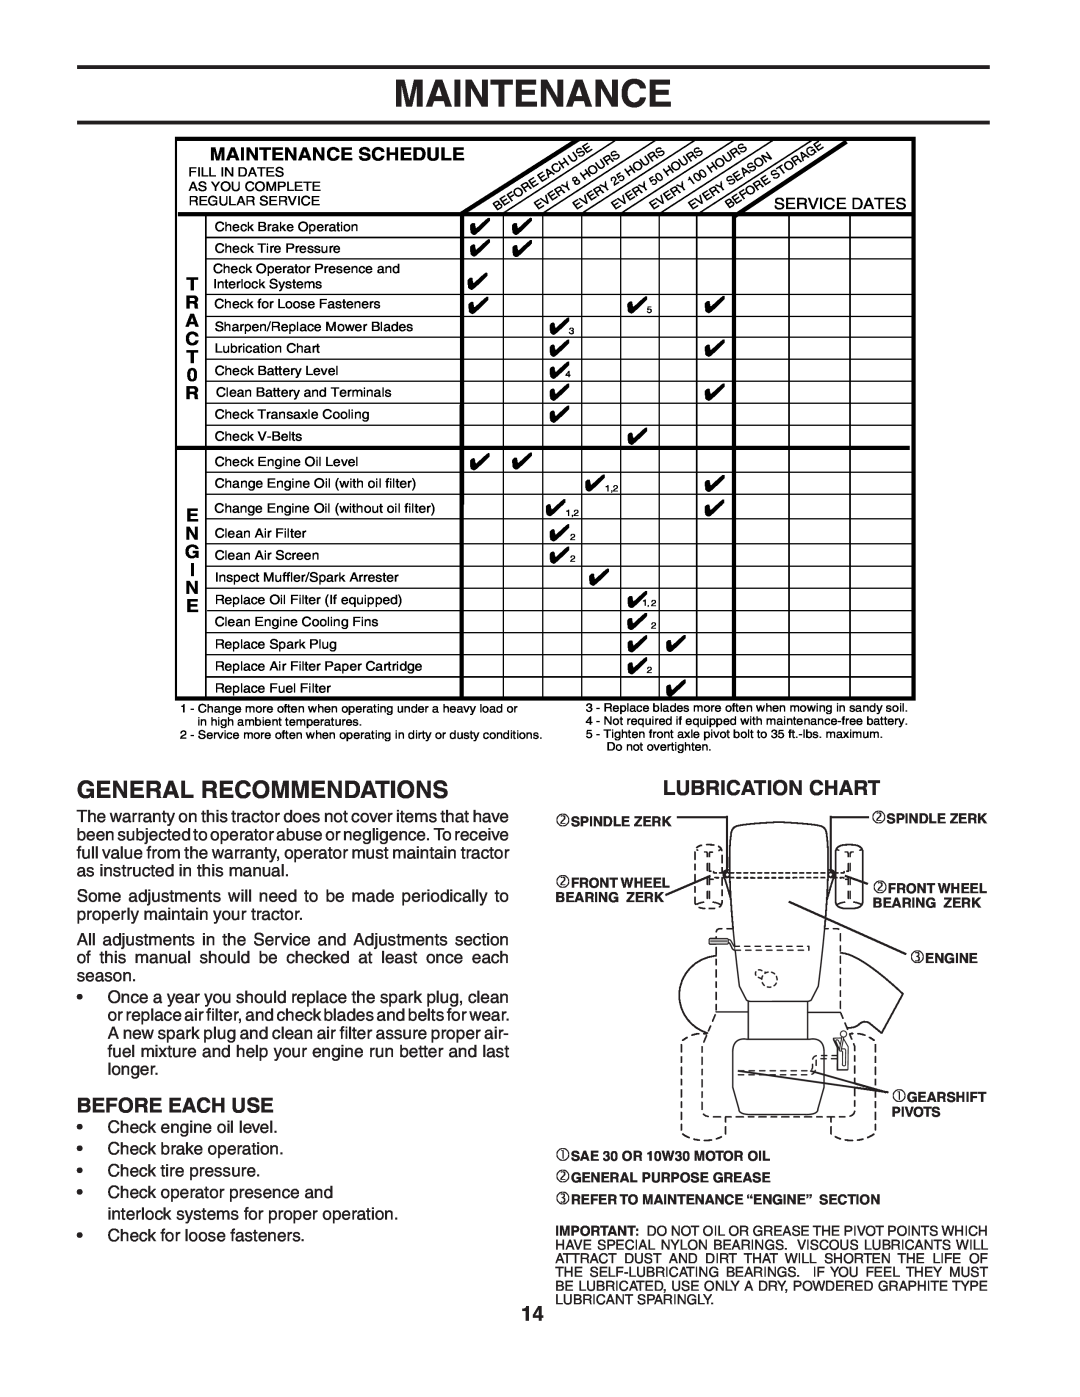 Poulan PO1742STC manual Maintenance, General Recommendations, Before Each Use, Lubrication Chart 